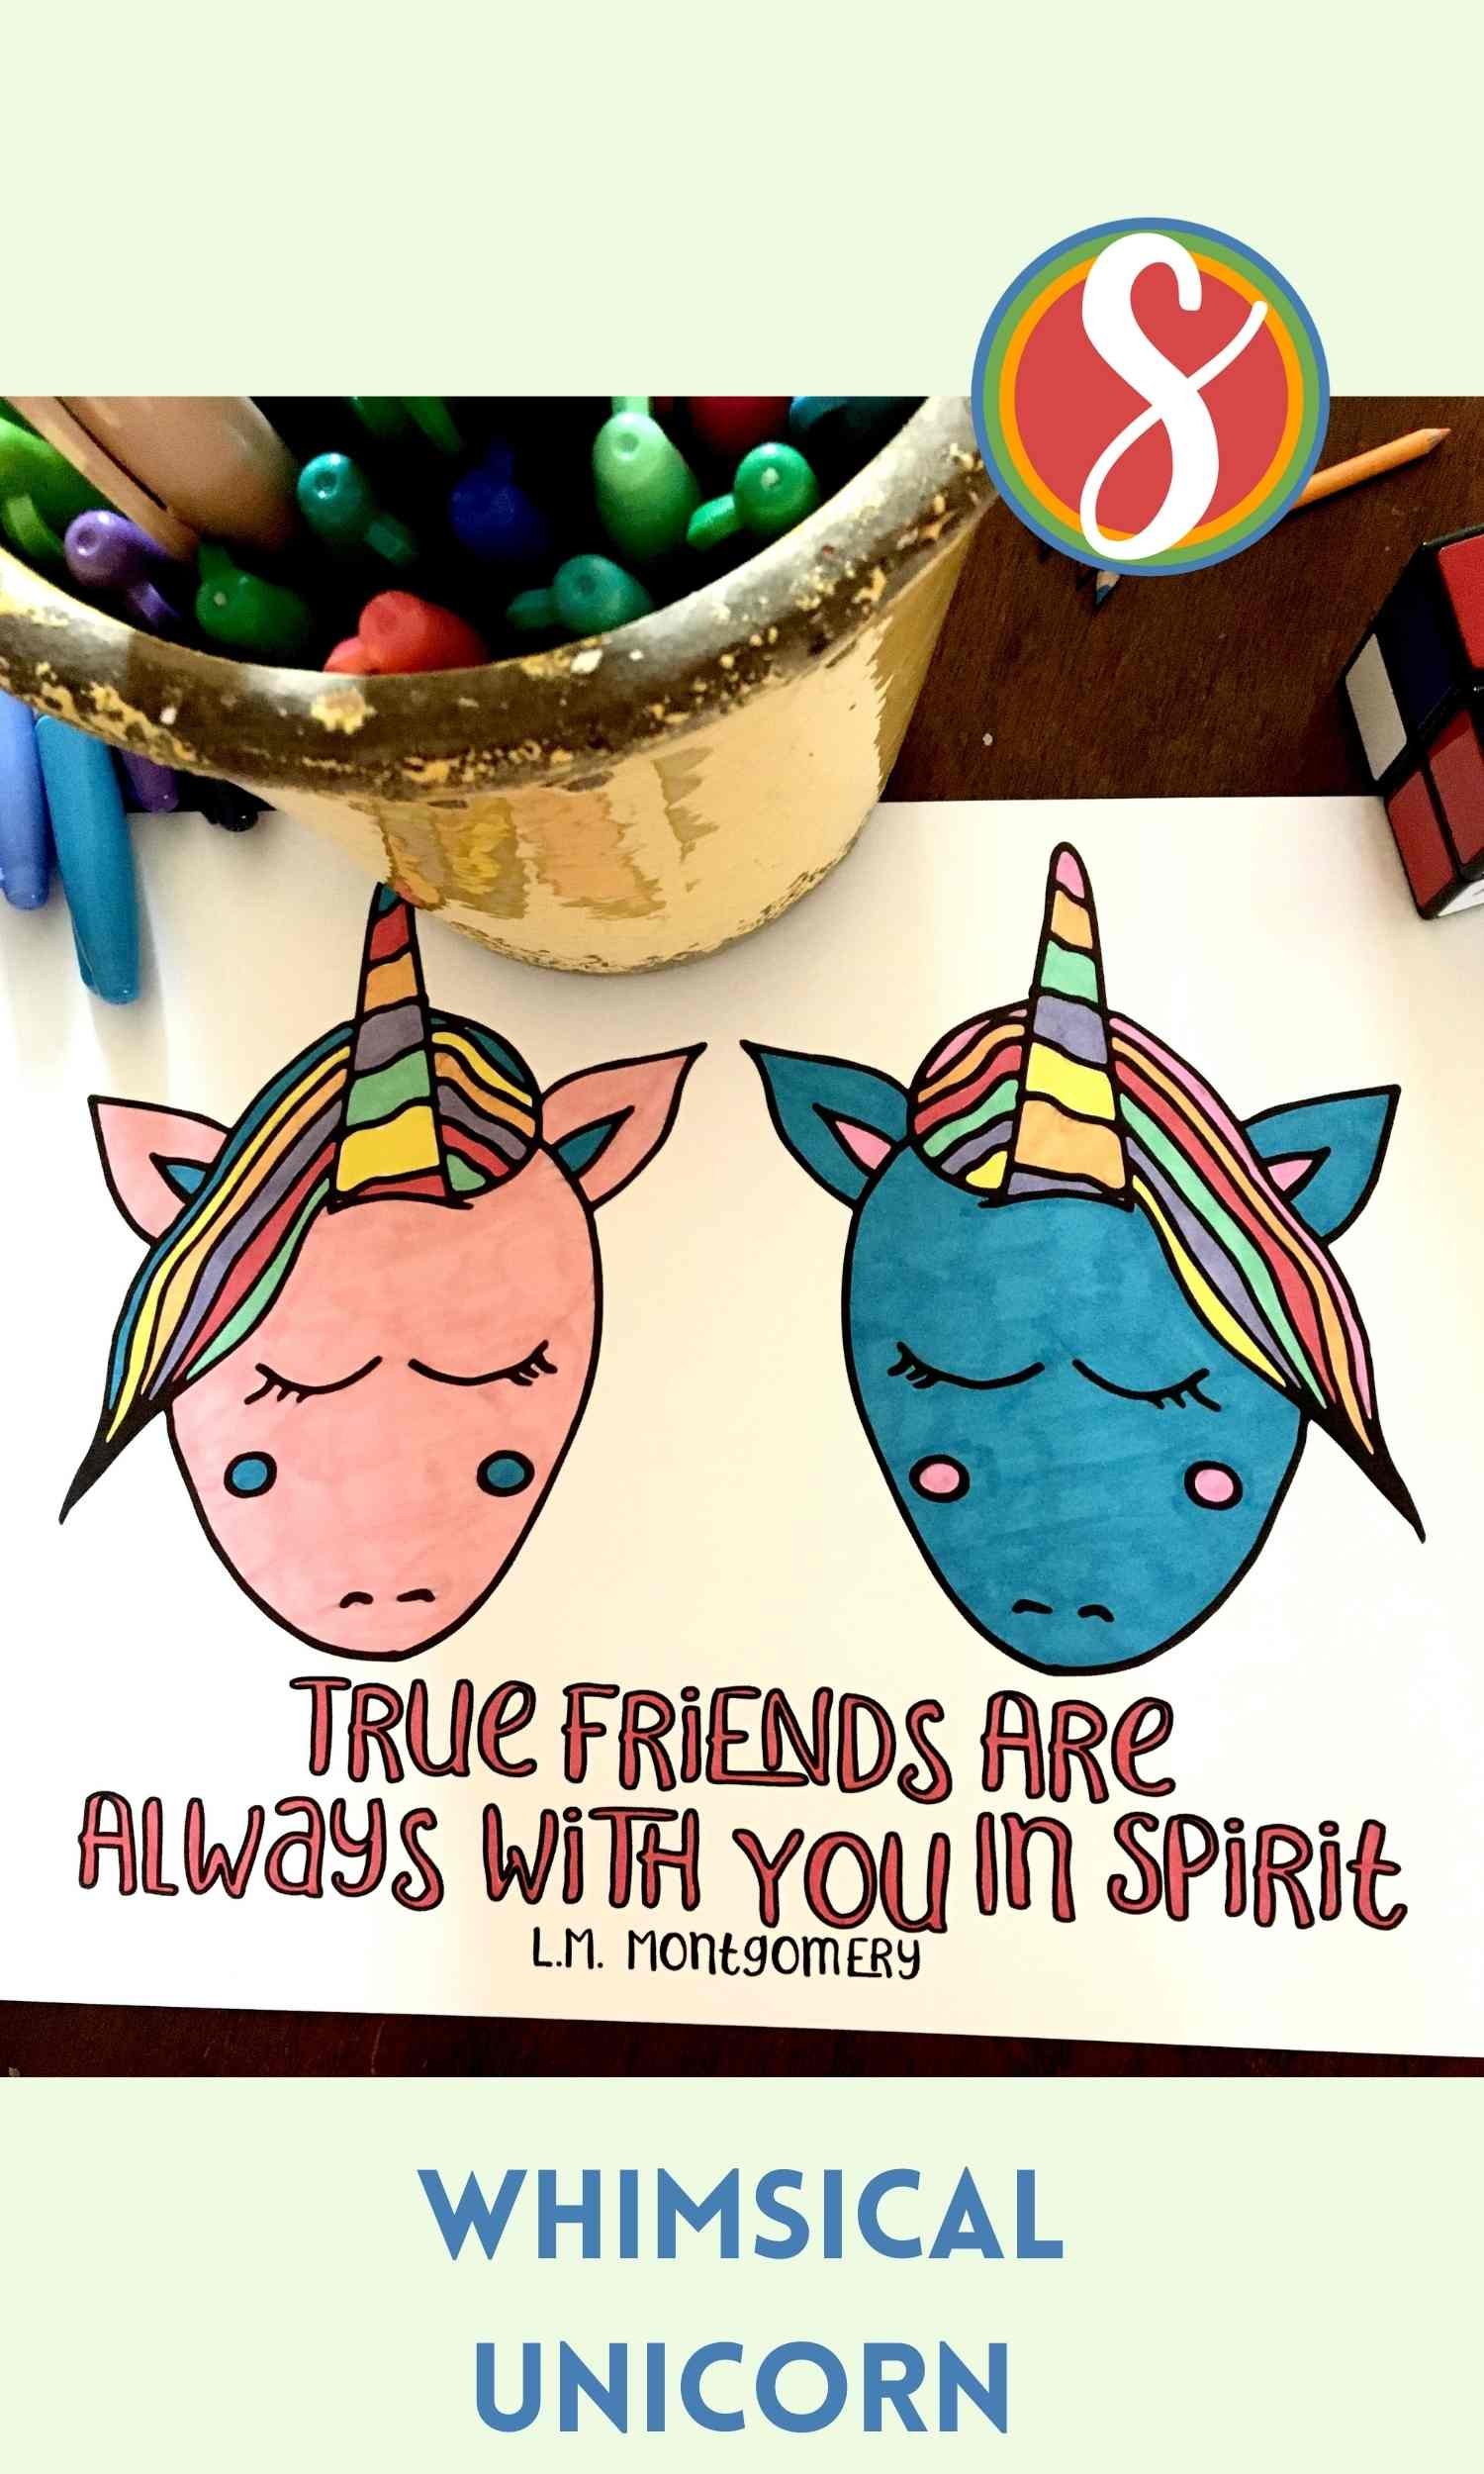 two unicorn heads, colored, and colorable words "true friends are always with you in spirit"